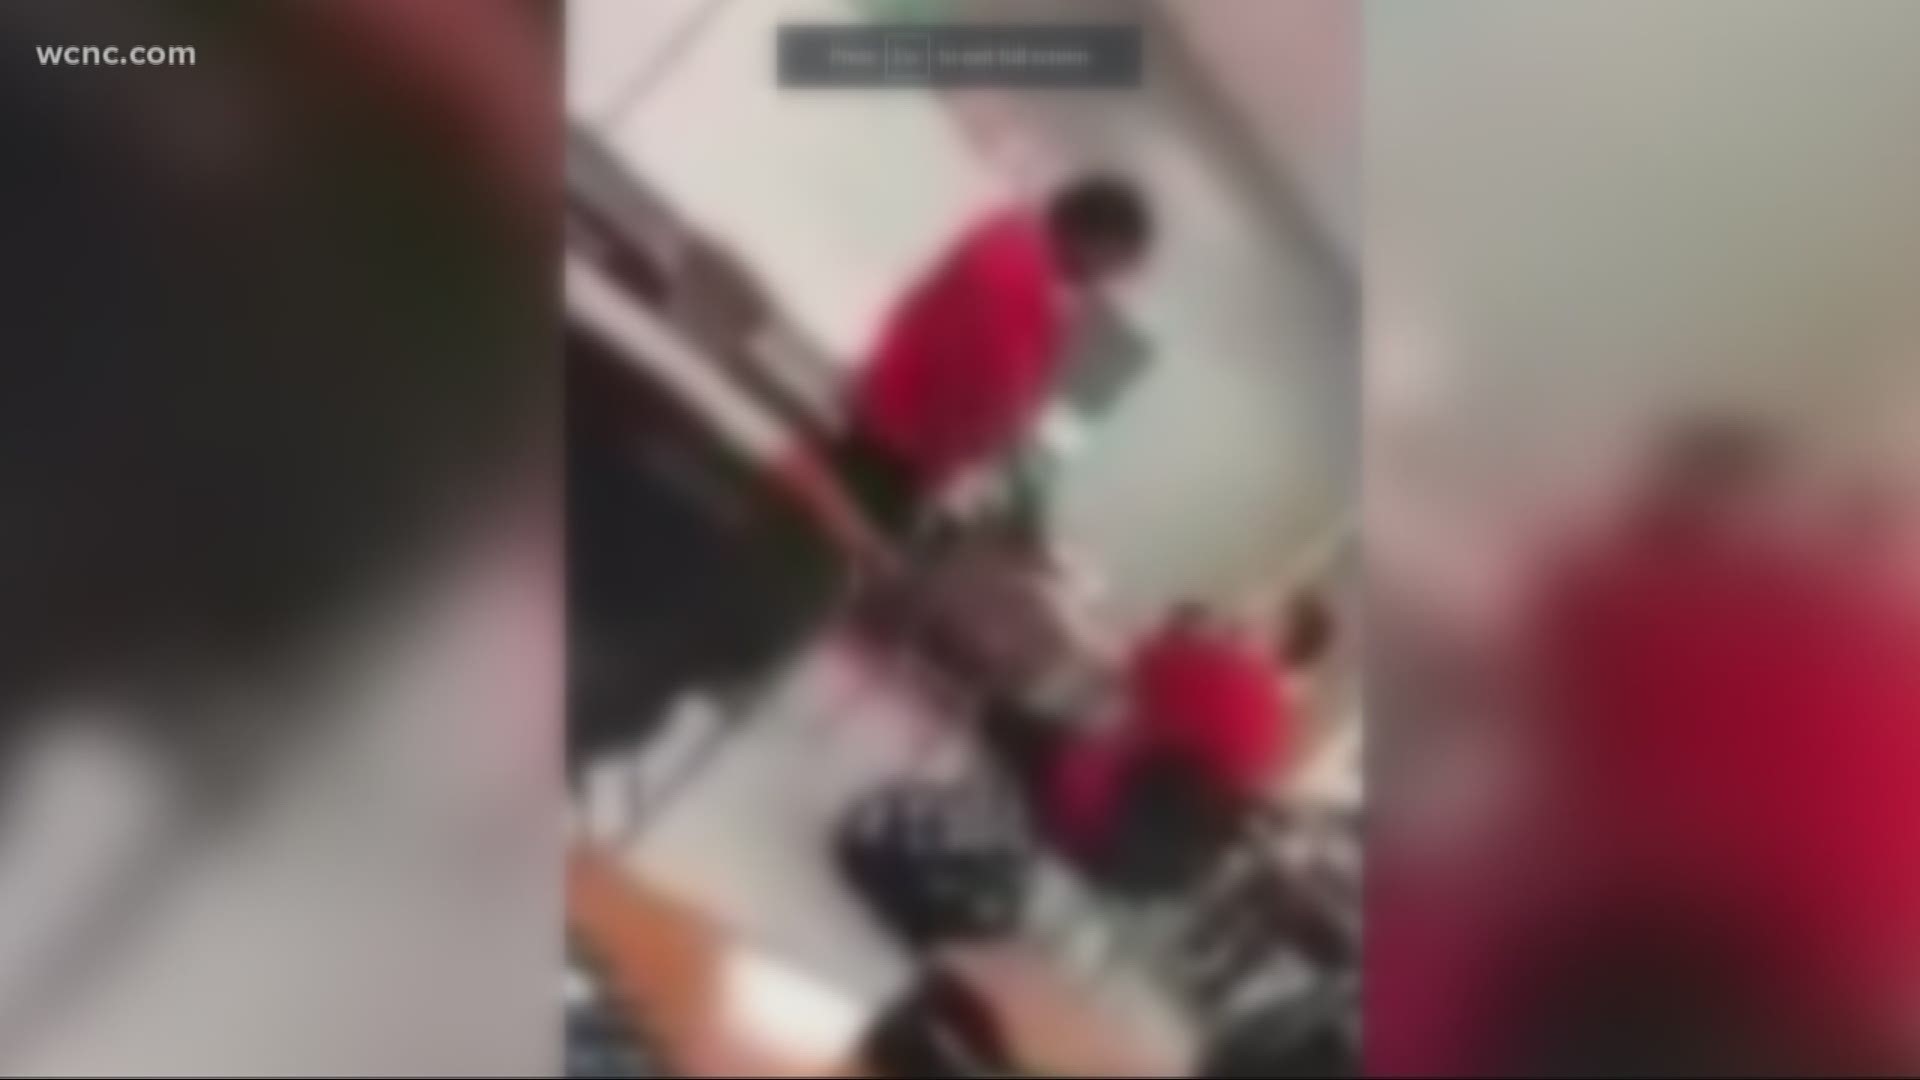 Report: Teacher involved in fight with student